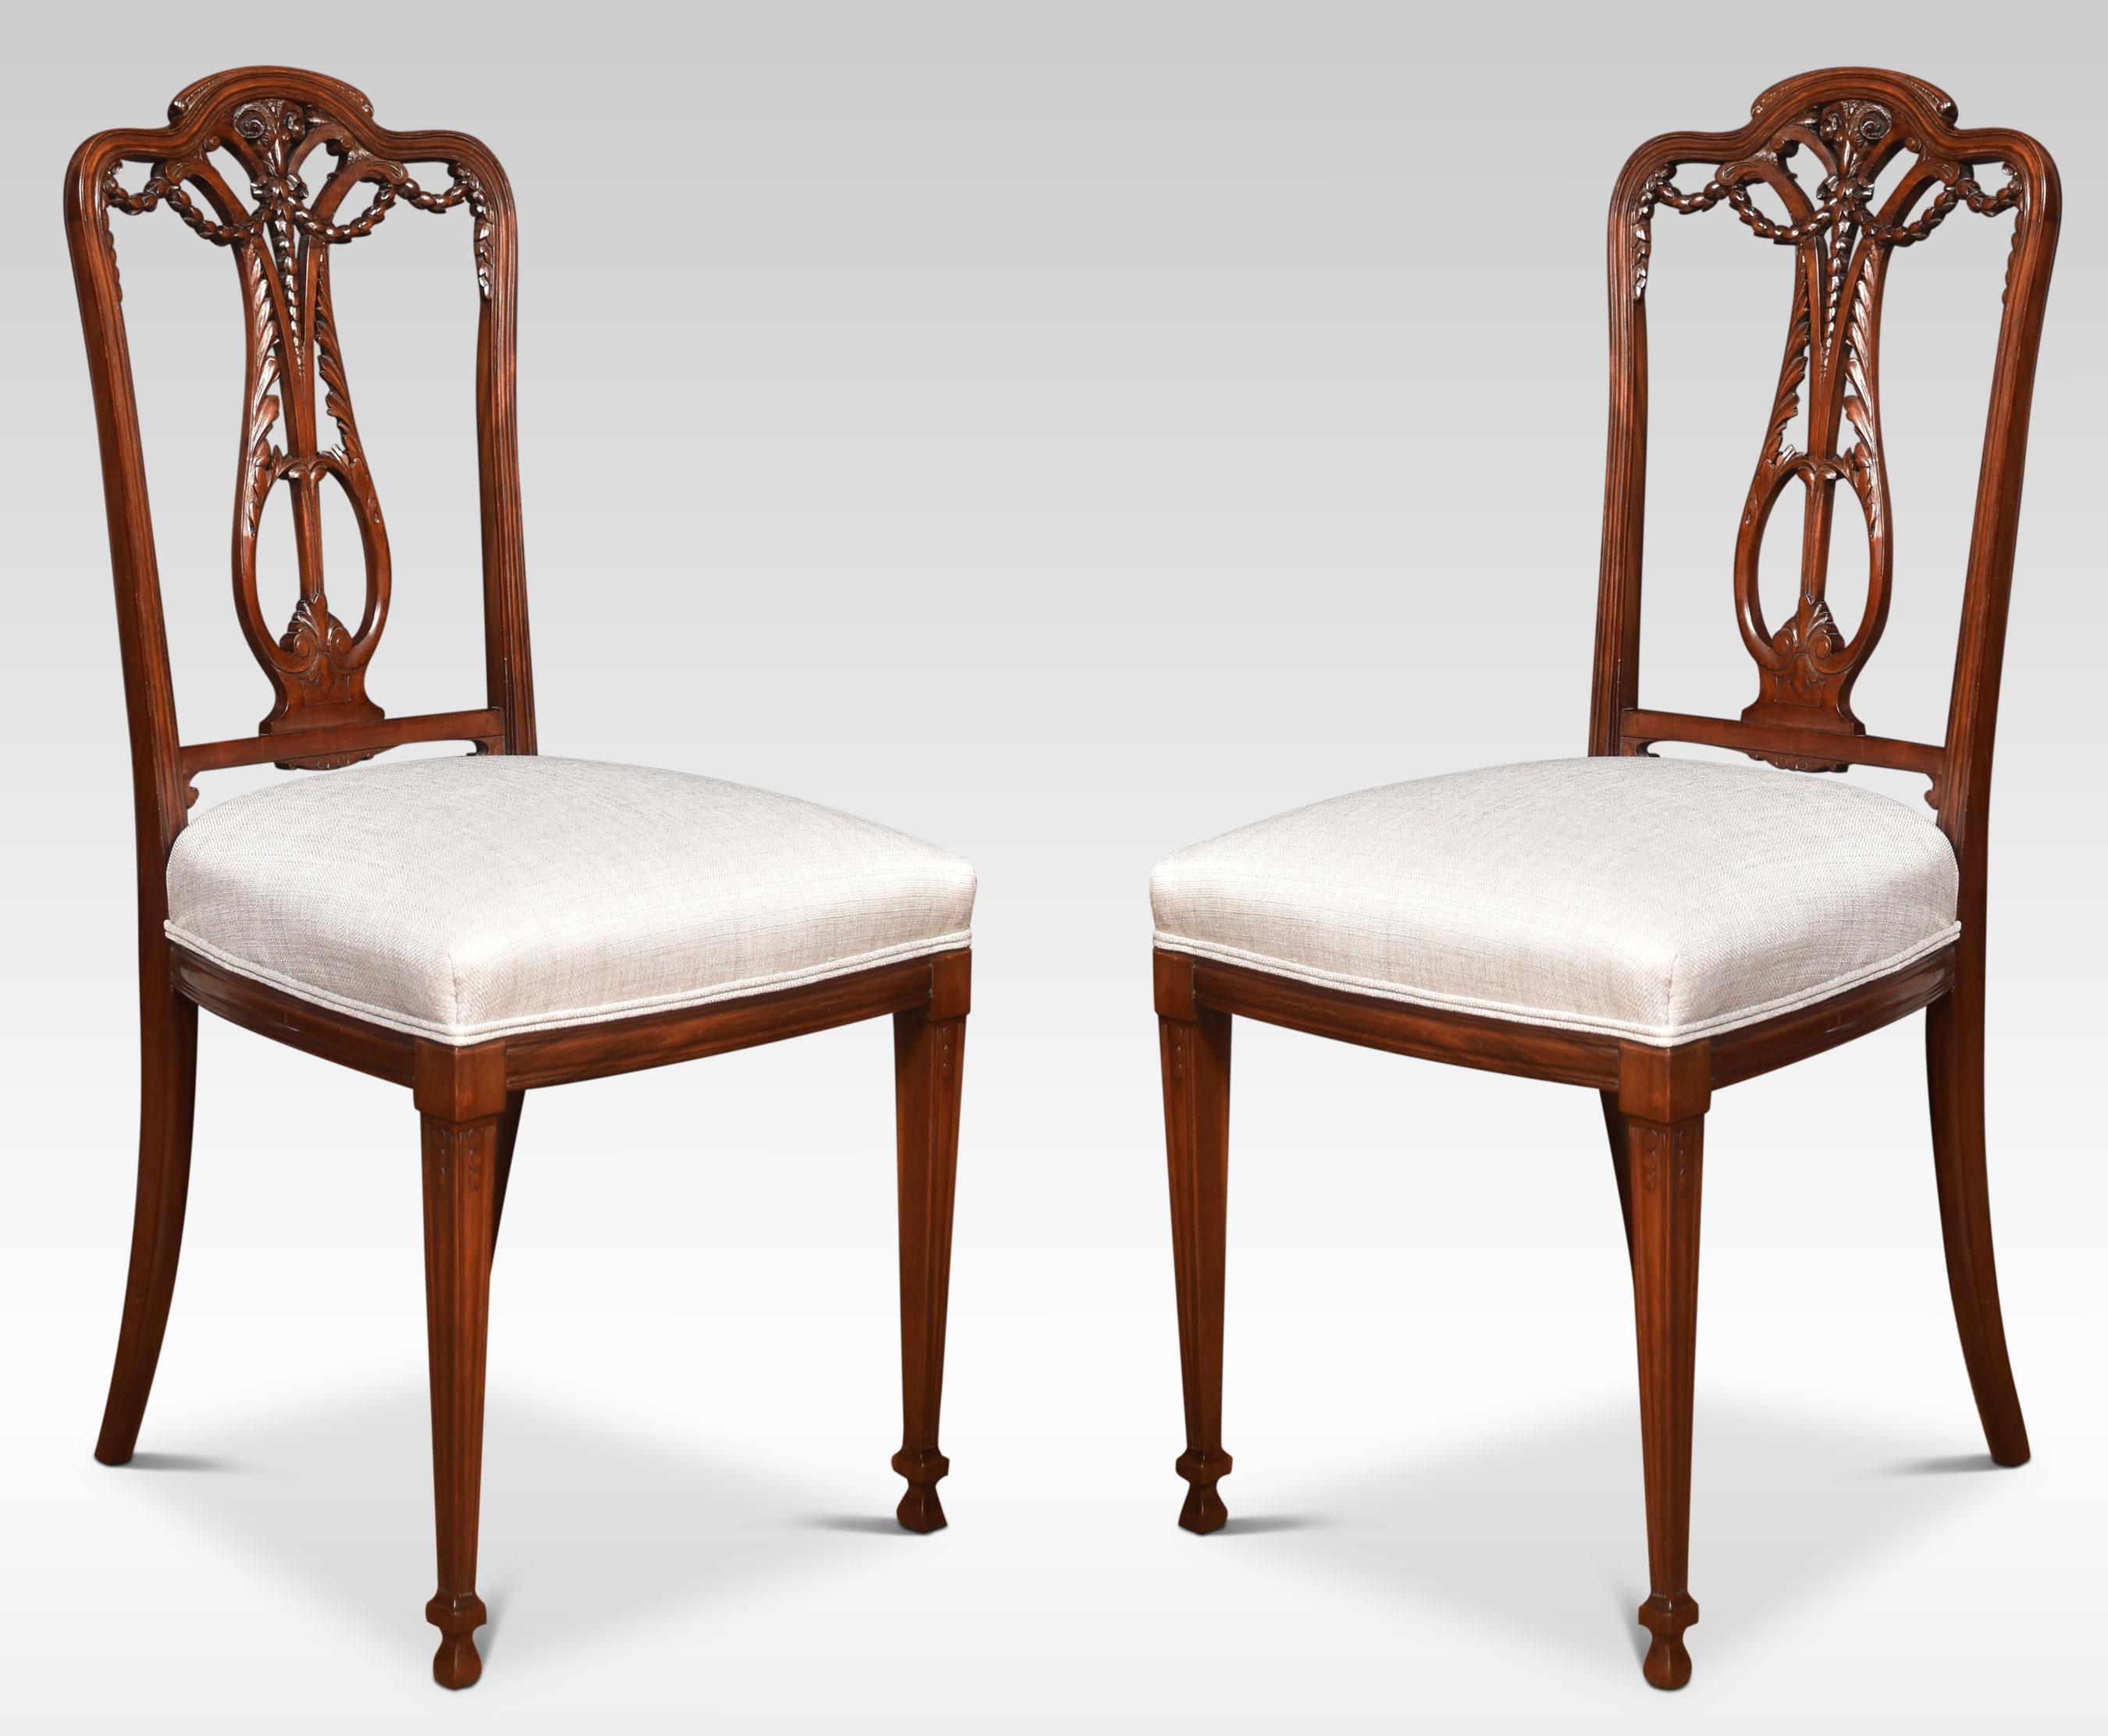 Set of four walnut dining chairs with carved-shaped pierced backrests over an upholstered seat All raised up on tapering legs.
Dimensions
Dimensions
Height 38.5 inches height to seat 19 inches
Width 18 inches
Depth 19 inches.